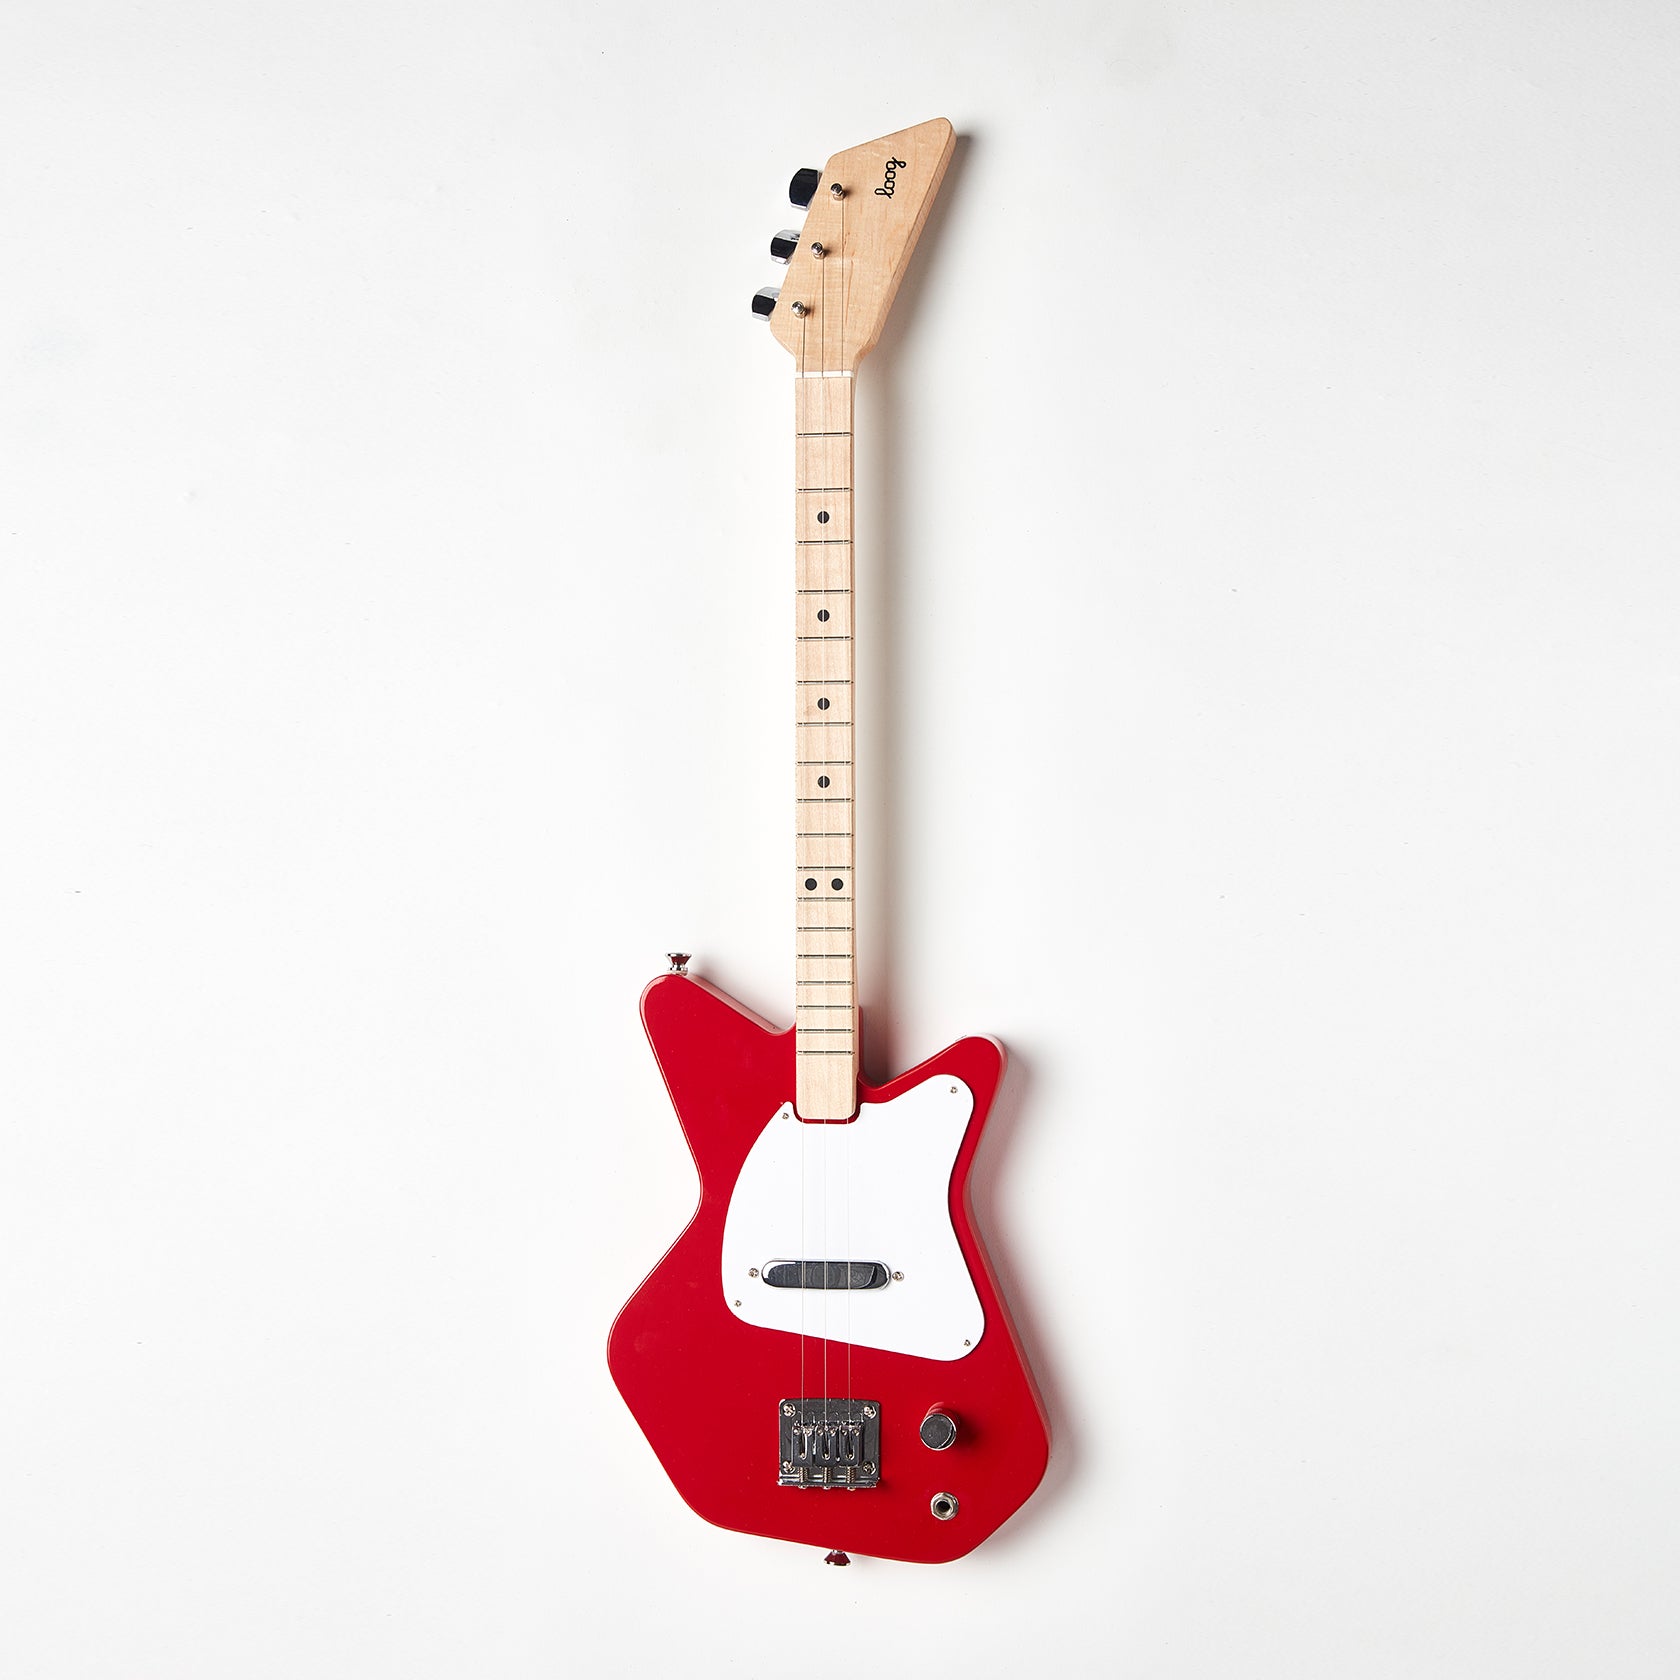 Big Save!Music Electric Guitar Toy for Kids, 3 4 5 Year Old Girls